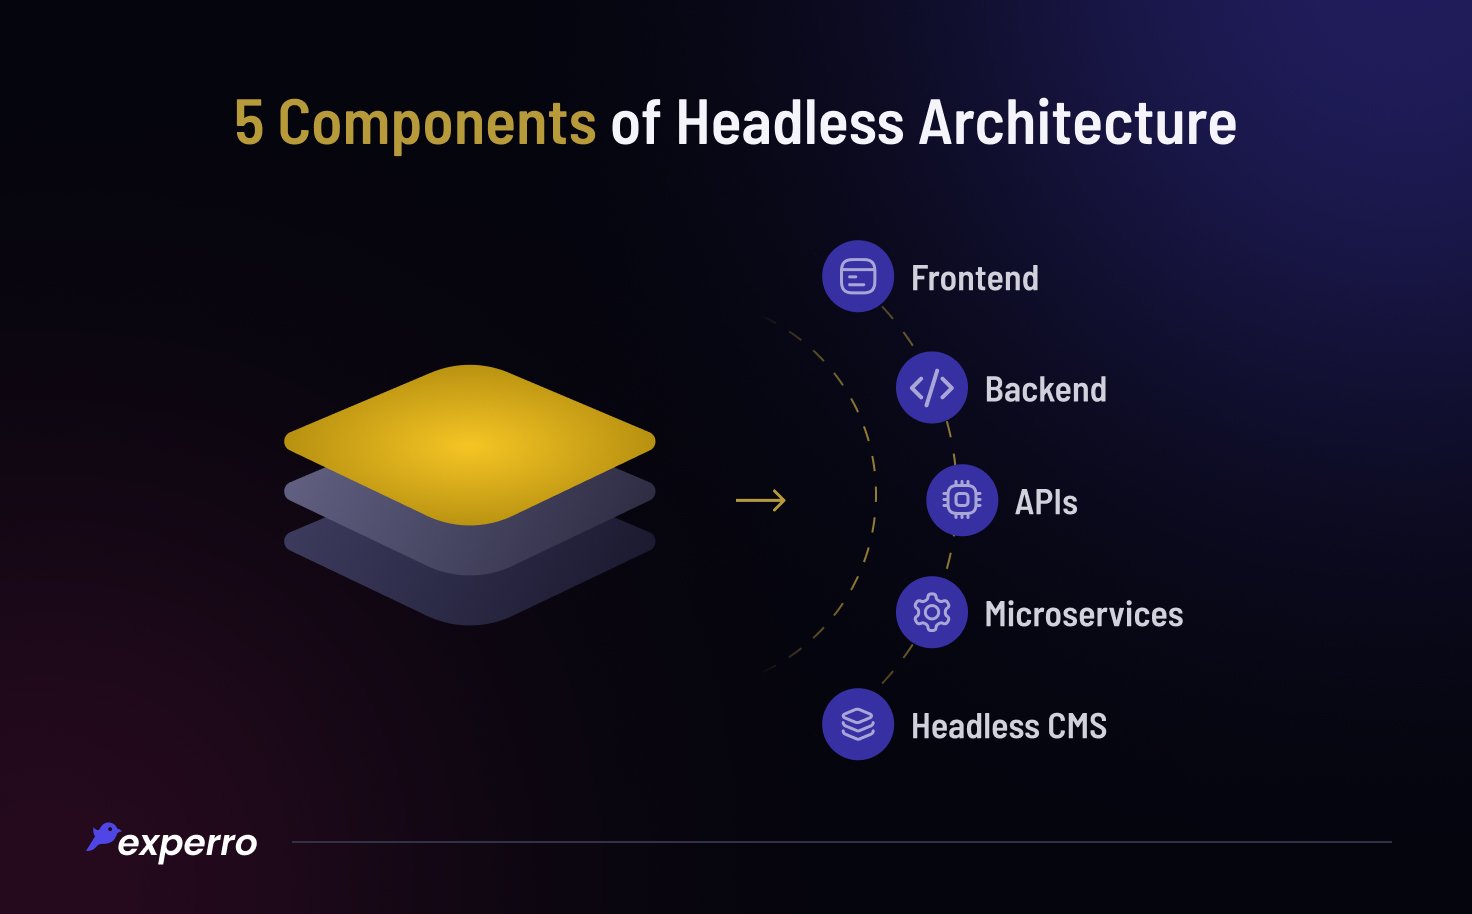 5 Headless Architecture Components